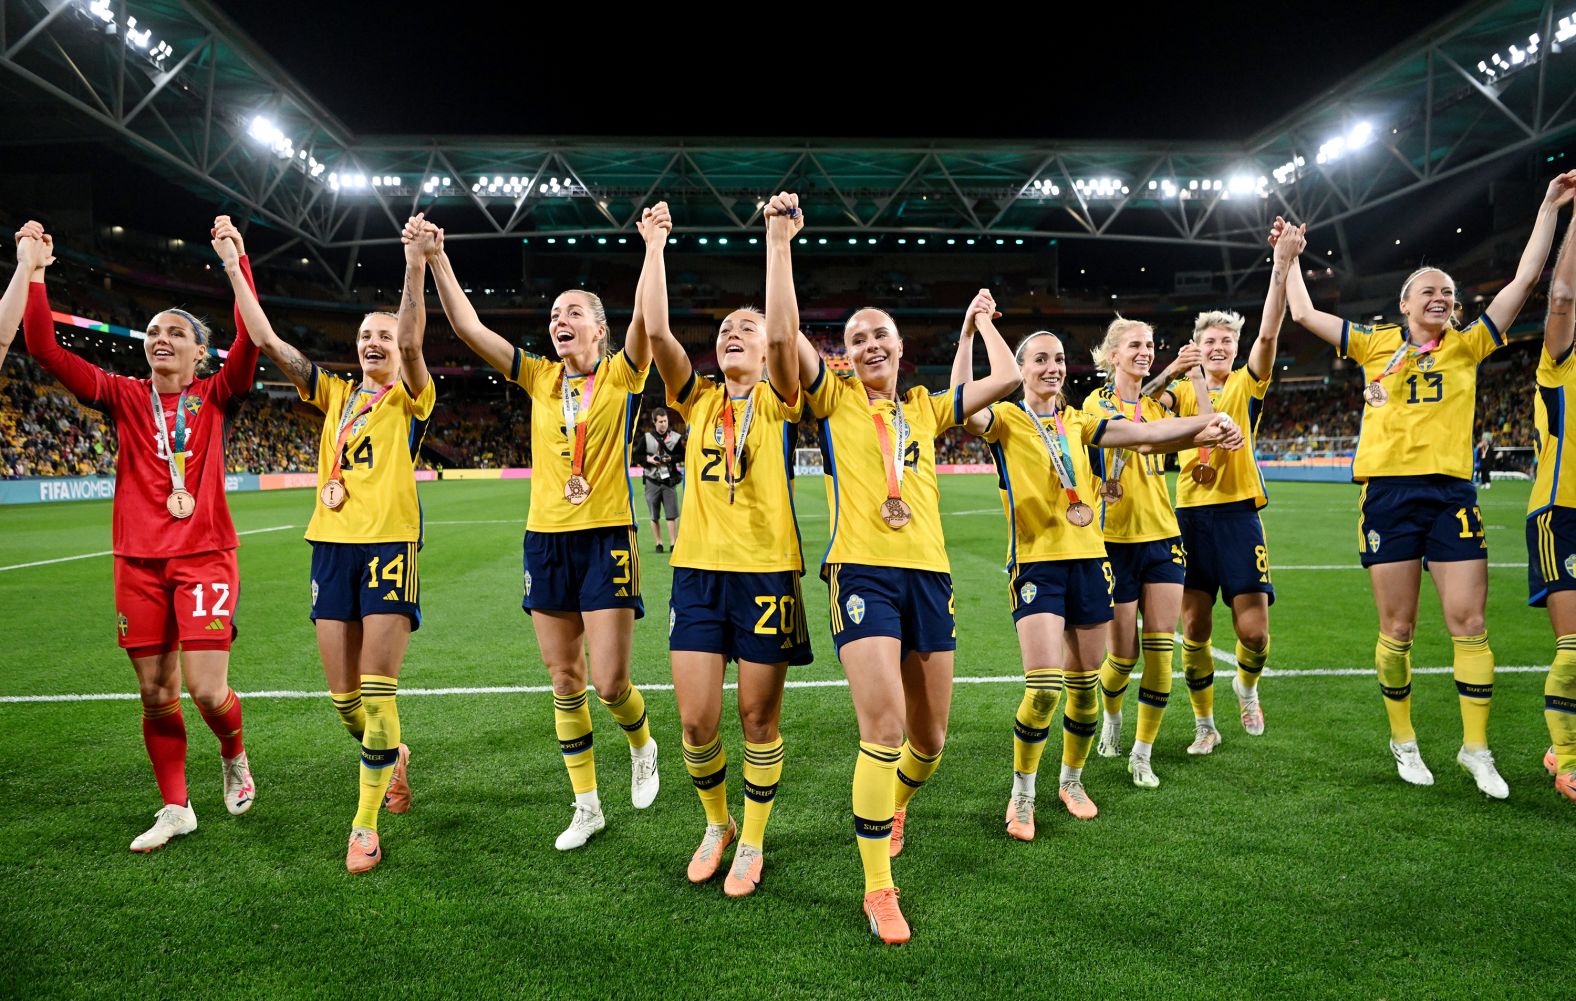 Swedish players celebrate after defeating Australia 2-0 in the <a href="index.php?page=&url=https%3A%2F%2Fwww.cnn.com%2F2023%2F08%2F19%2Ffootball%2Faustralia-sweden-womens-world-cup-2023-spt-intl%2Findex.html" target="_blank">third-place playoff</a> on Saturday, August 19. Sweden also finished third in 1991, 1995 and 2019.